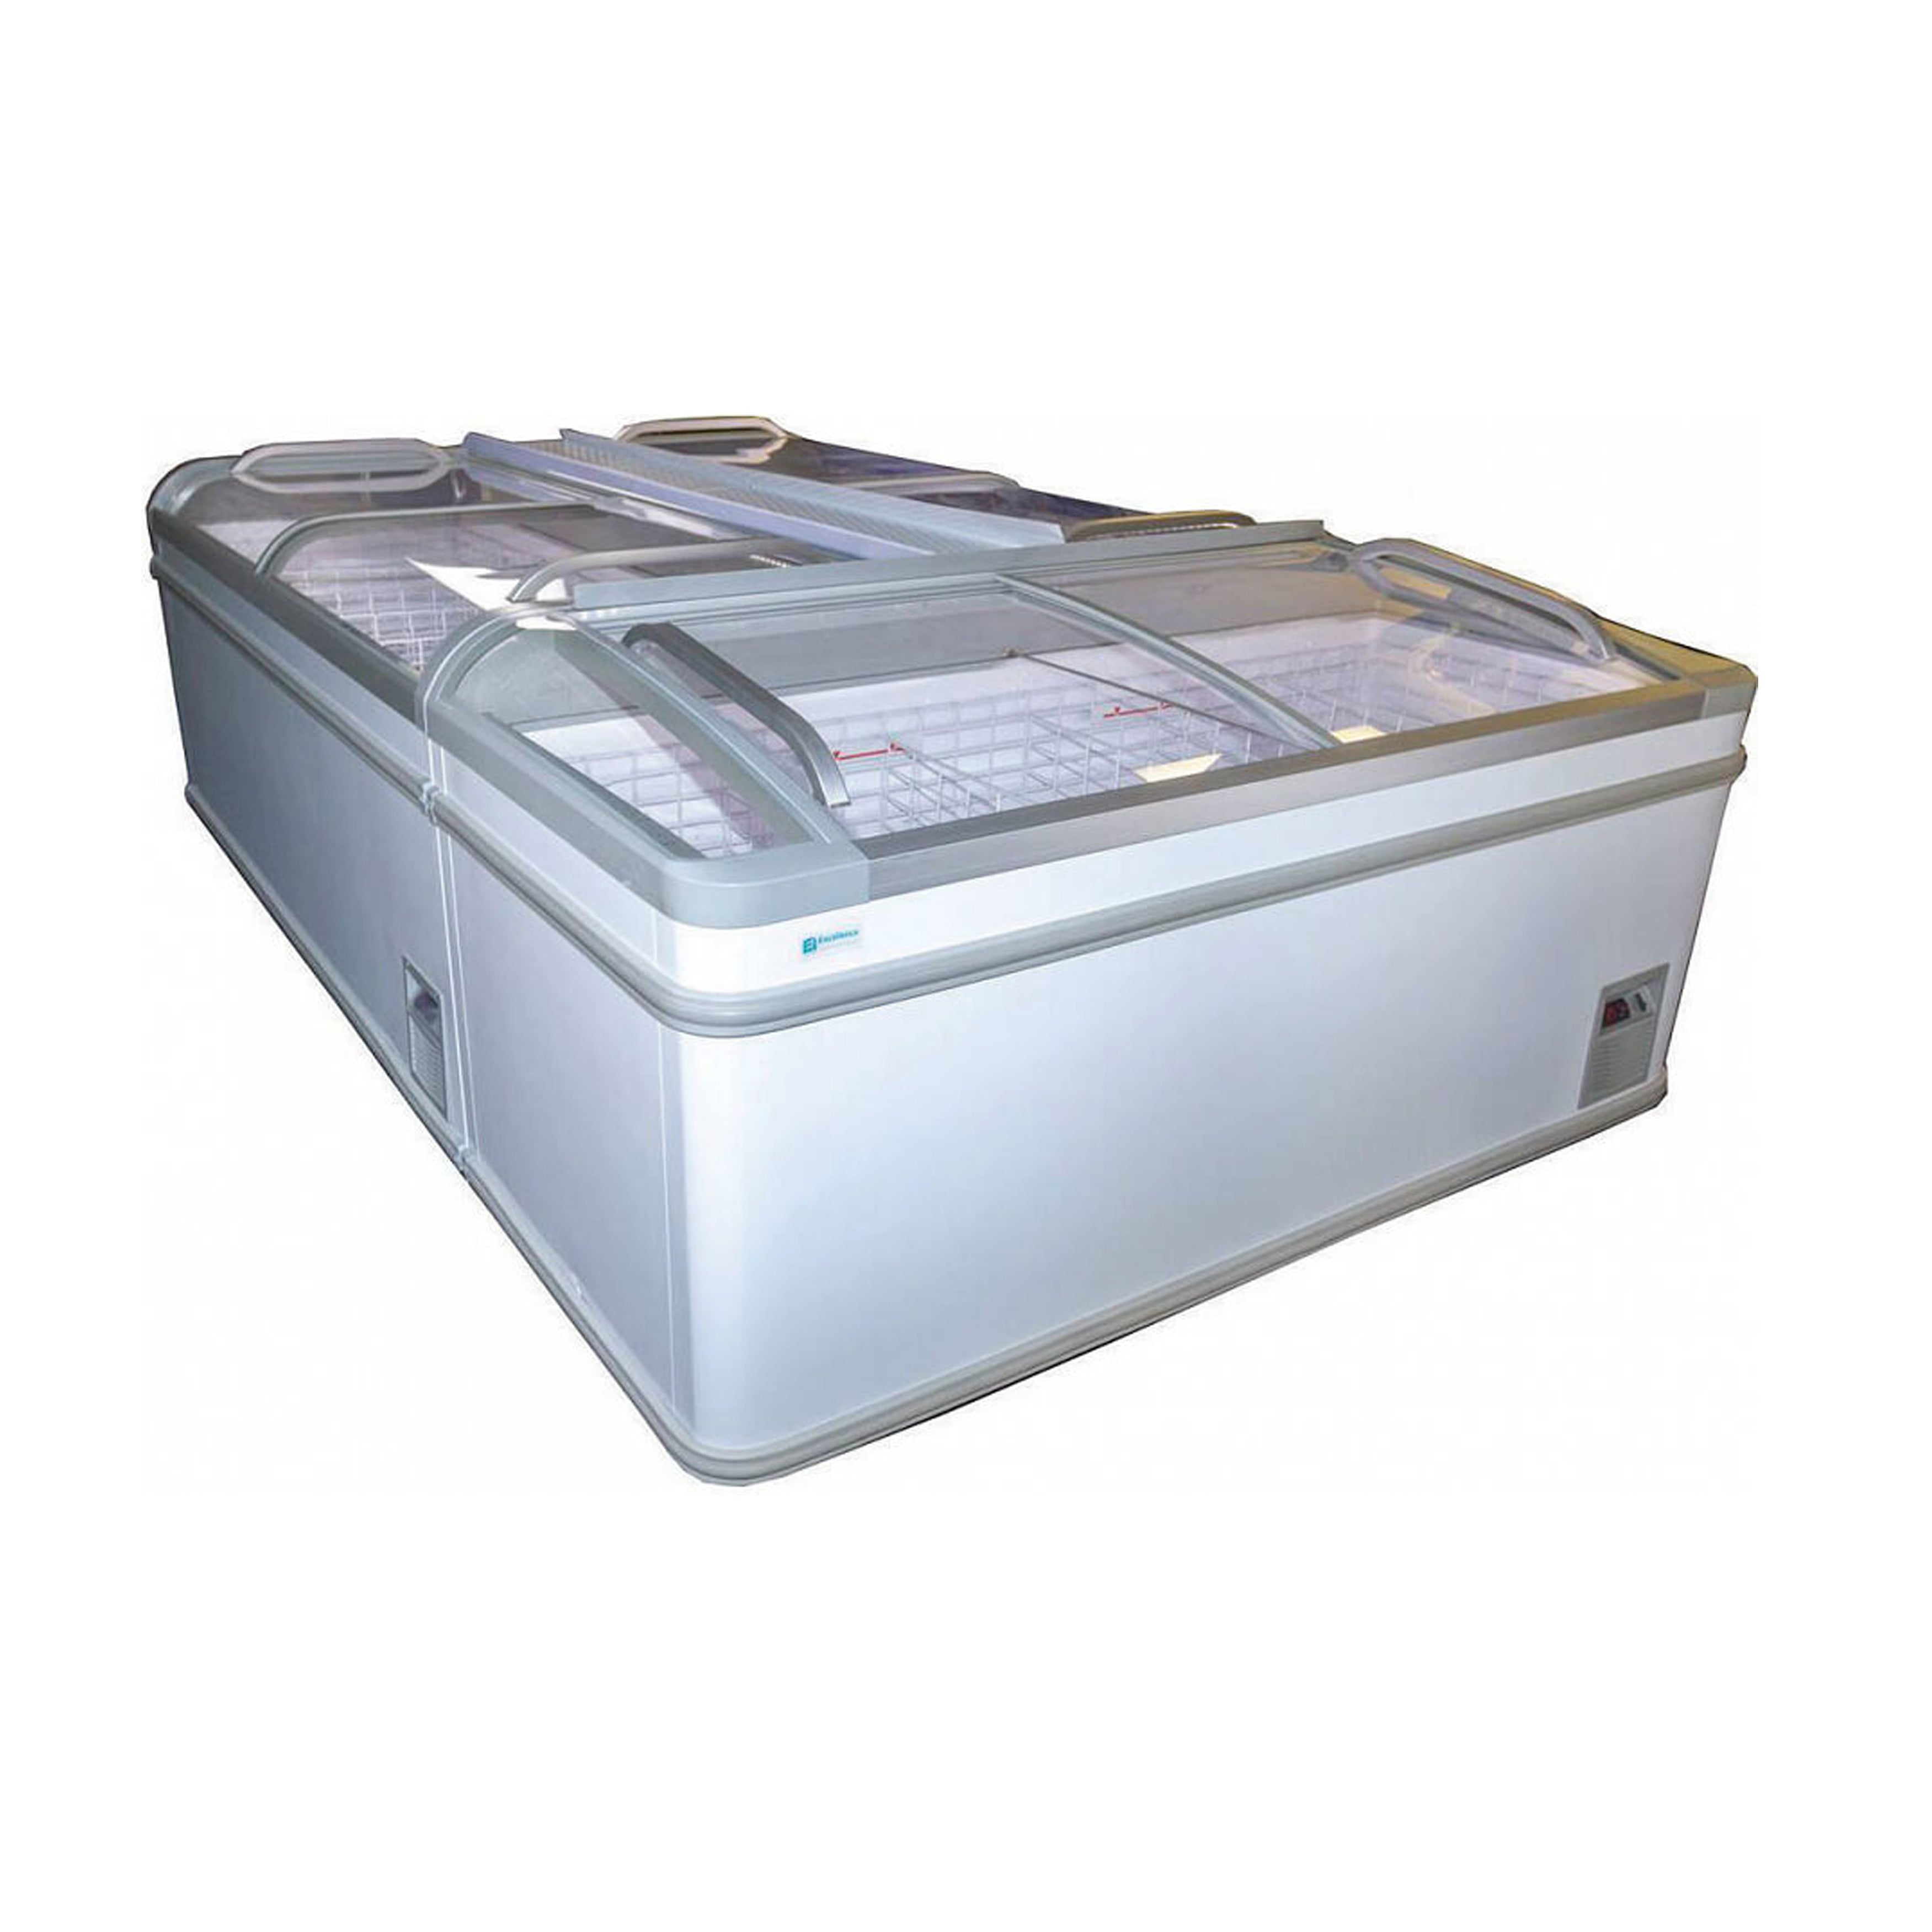 Excellence Industries - HR-18H, 73" Commercial Curved Top Island Display Freezer / Cooler 24.9 cu. ft.